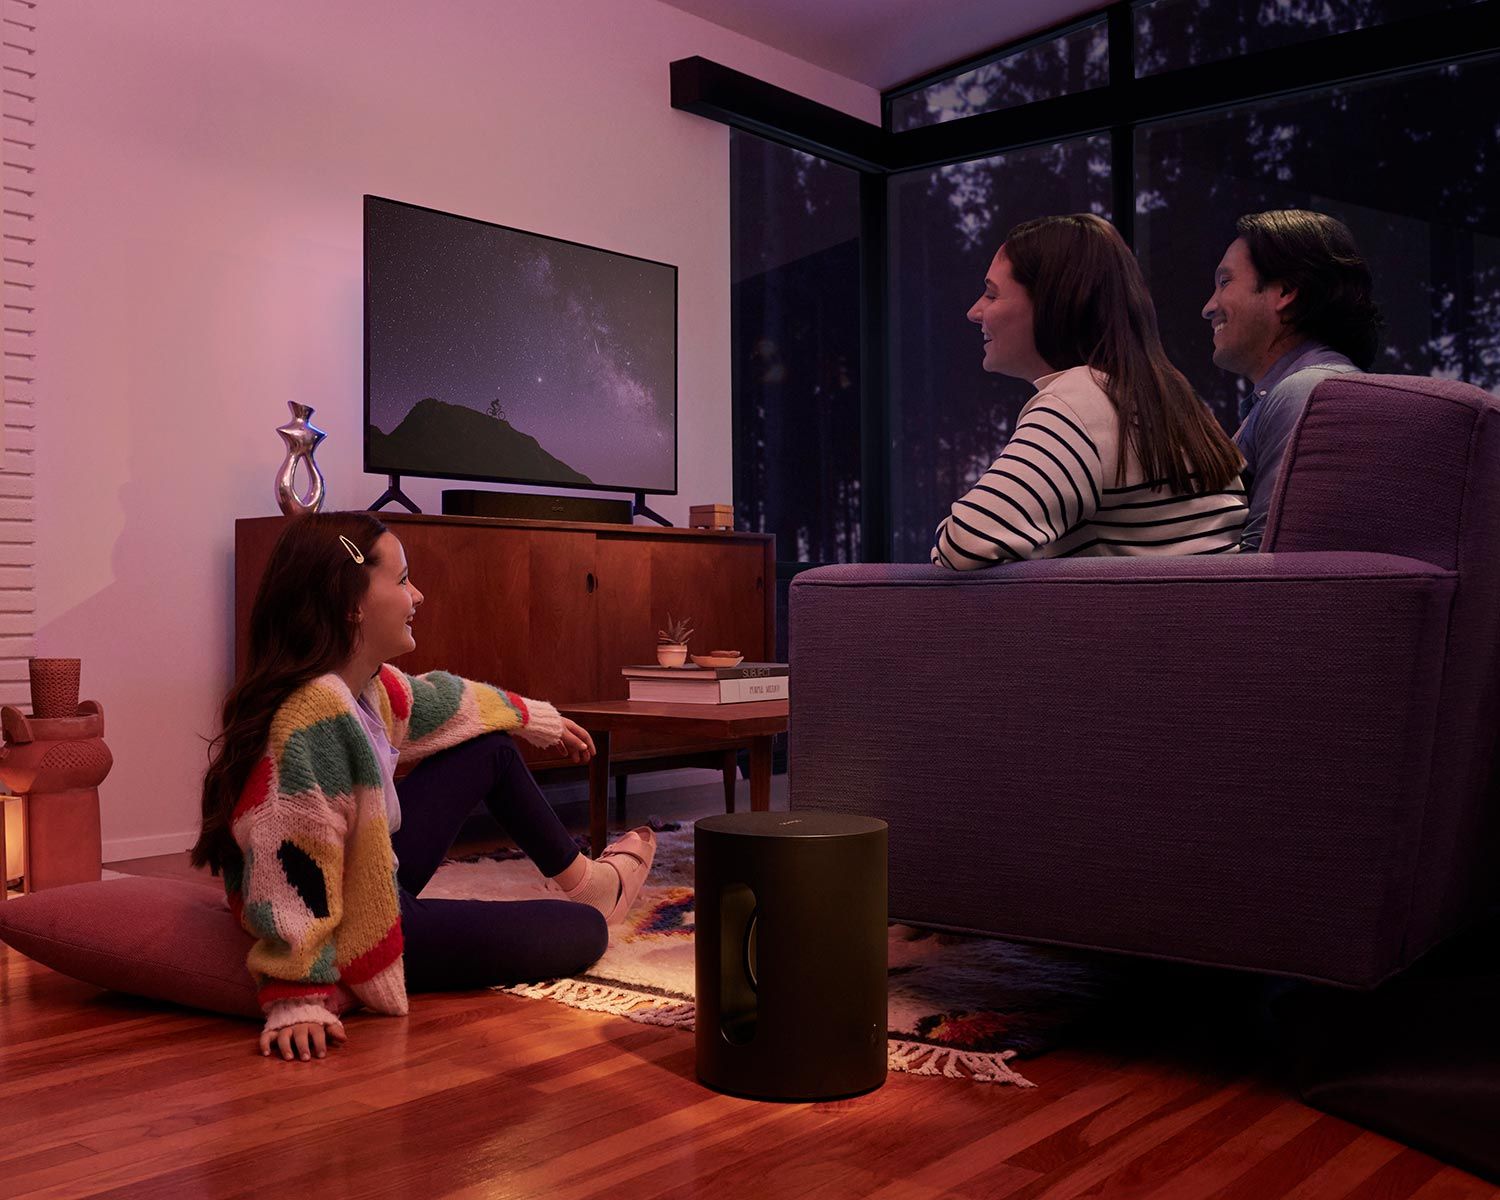 A family watching TV together in a cozy living room at night, with a young girl sitting on the floor and a Sonos speaker visible near the TV cabinet.